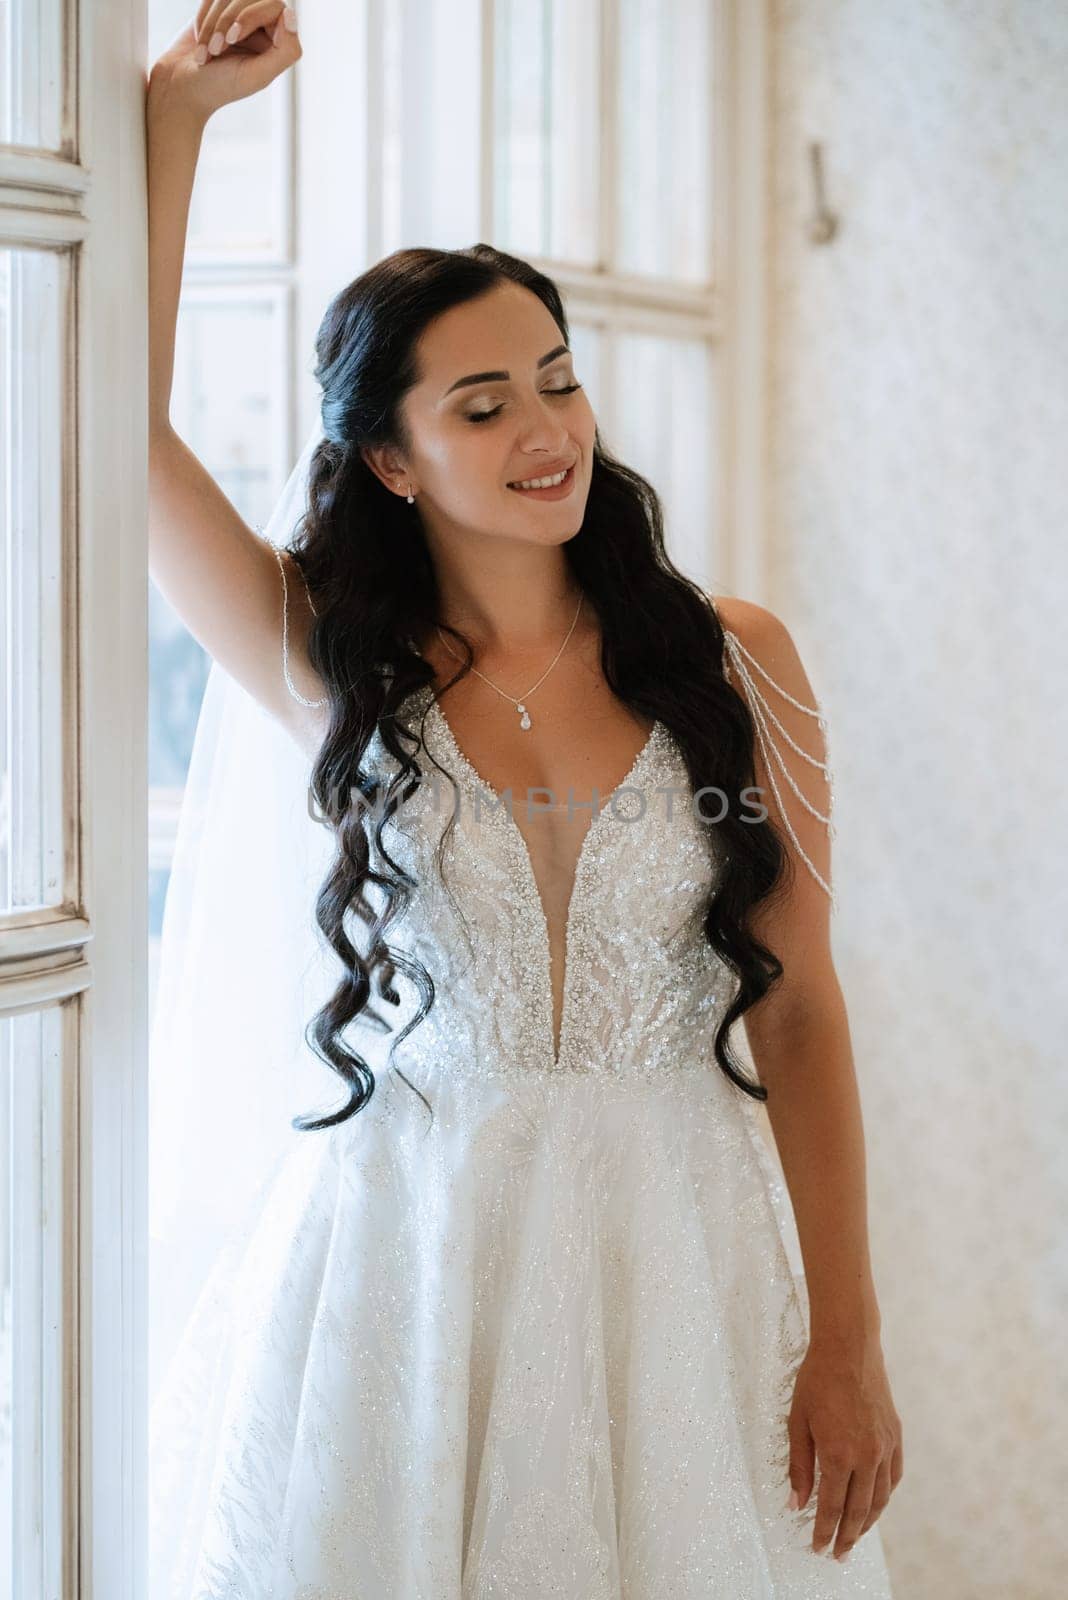 portrait of a bride in a white dress in a bright cafe with mirrors